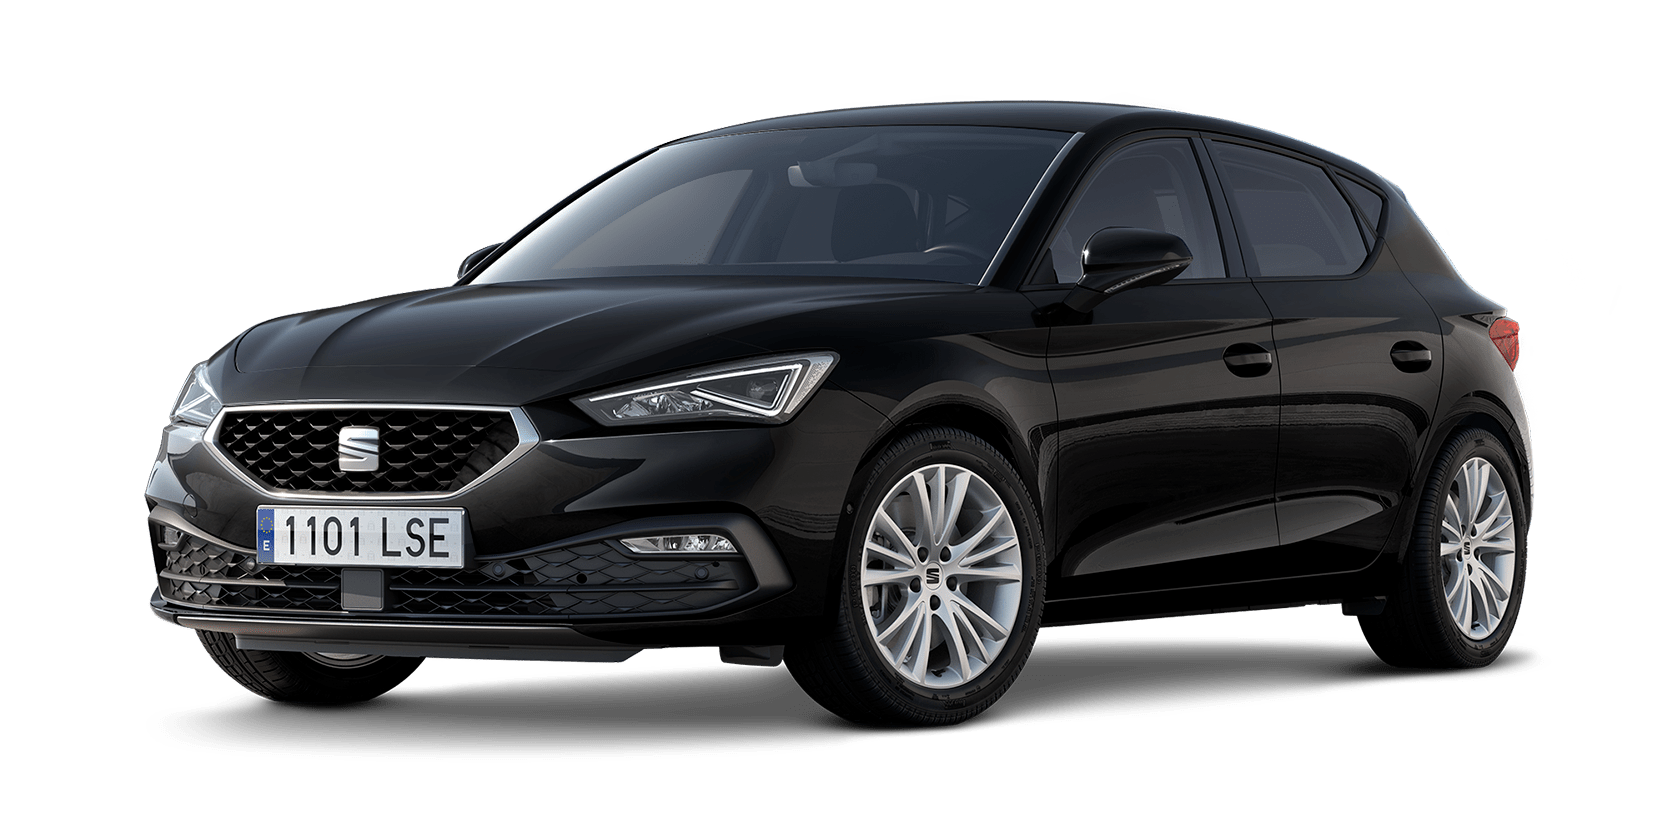 seat leon 5d style trim midnight black colour with dynamic alloy wheels